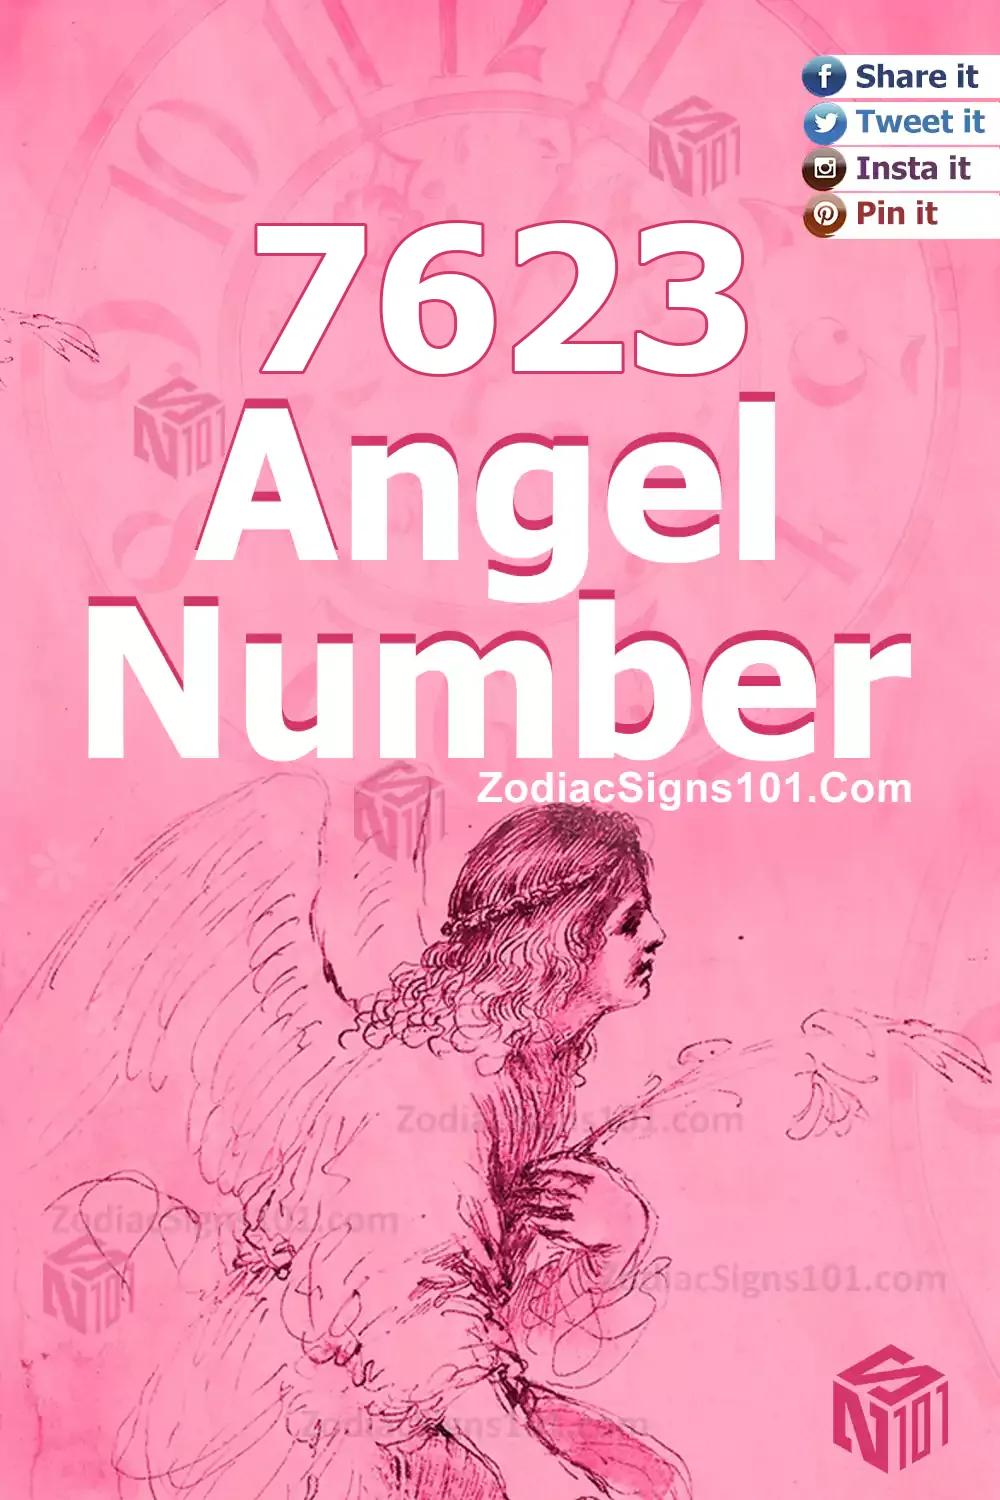 7623 Angel Number Meaning